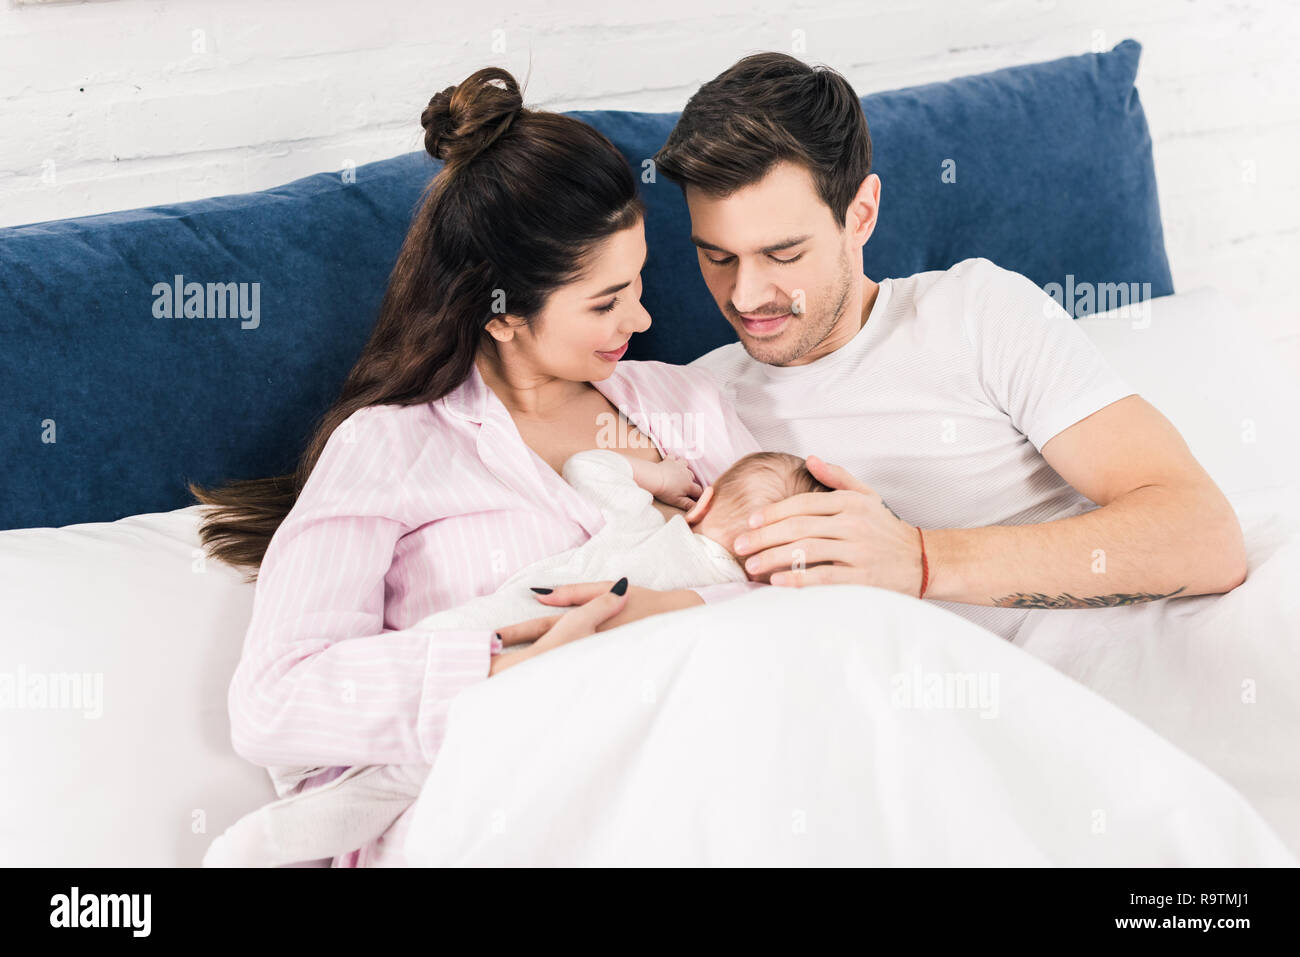 portrait of smiling mother breastfeeding little baby with husband near by on bed at home Stock Photo photo